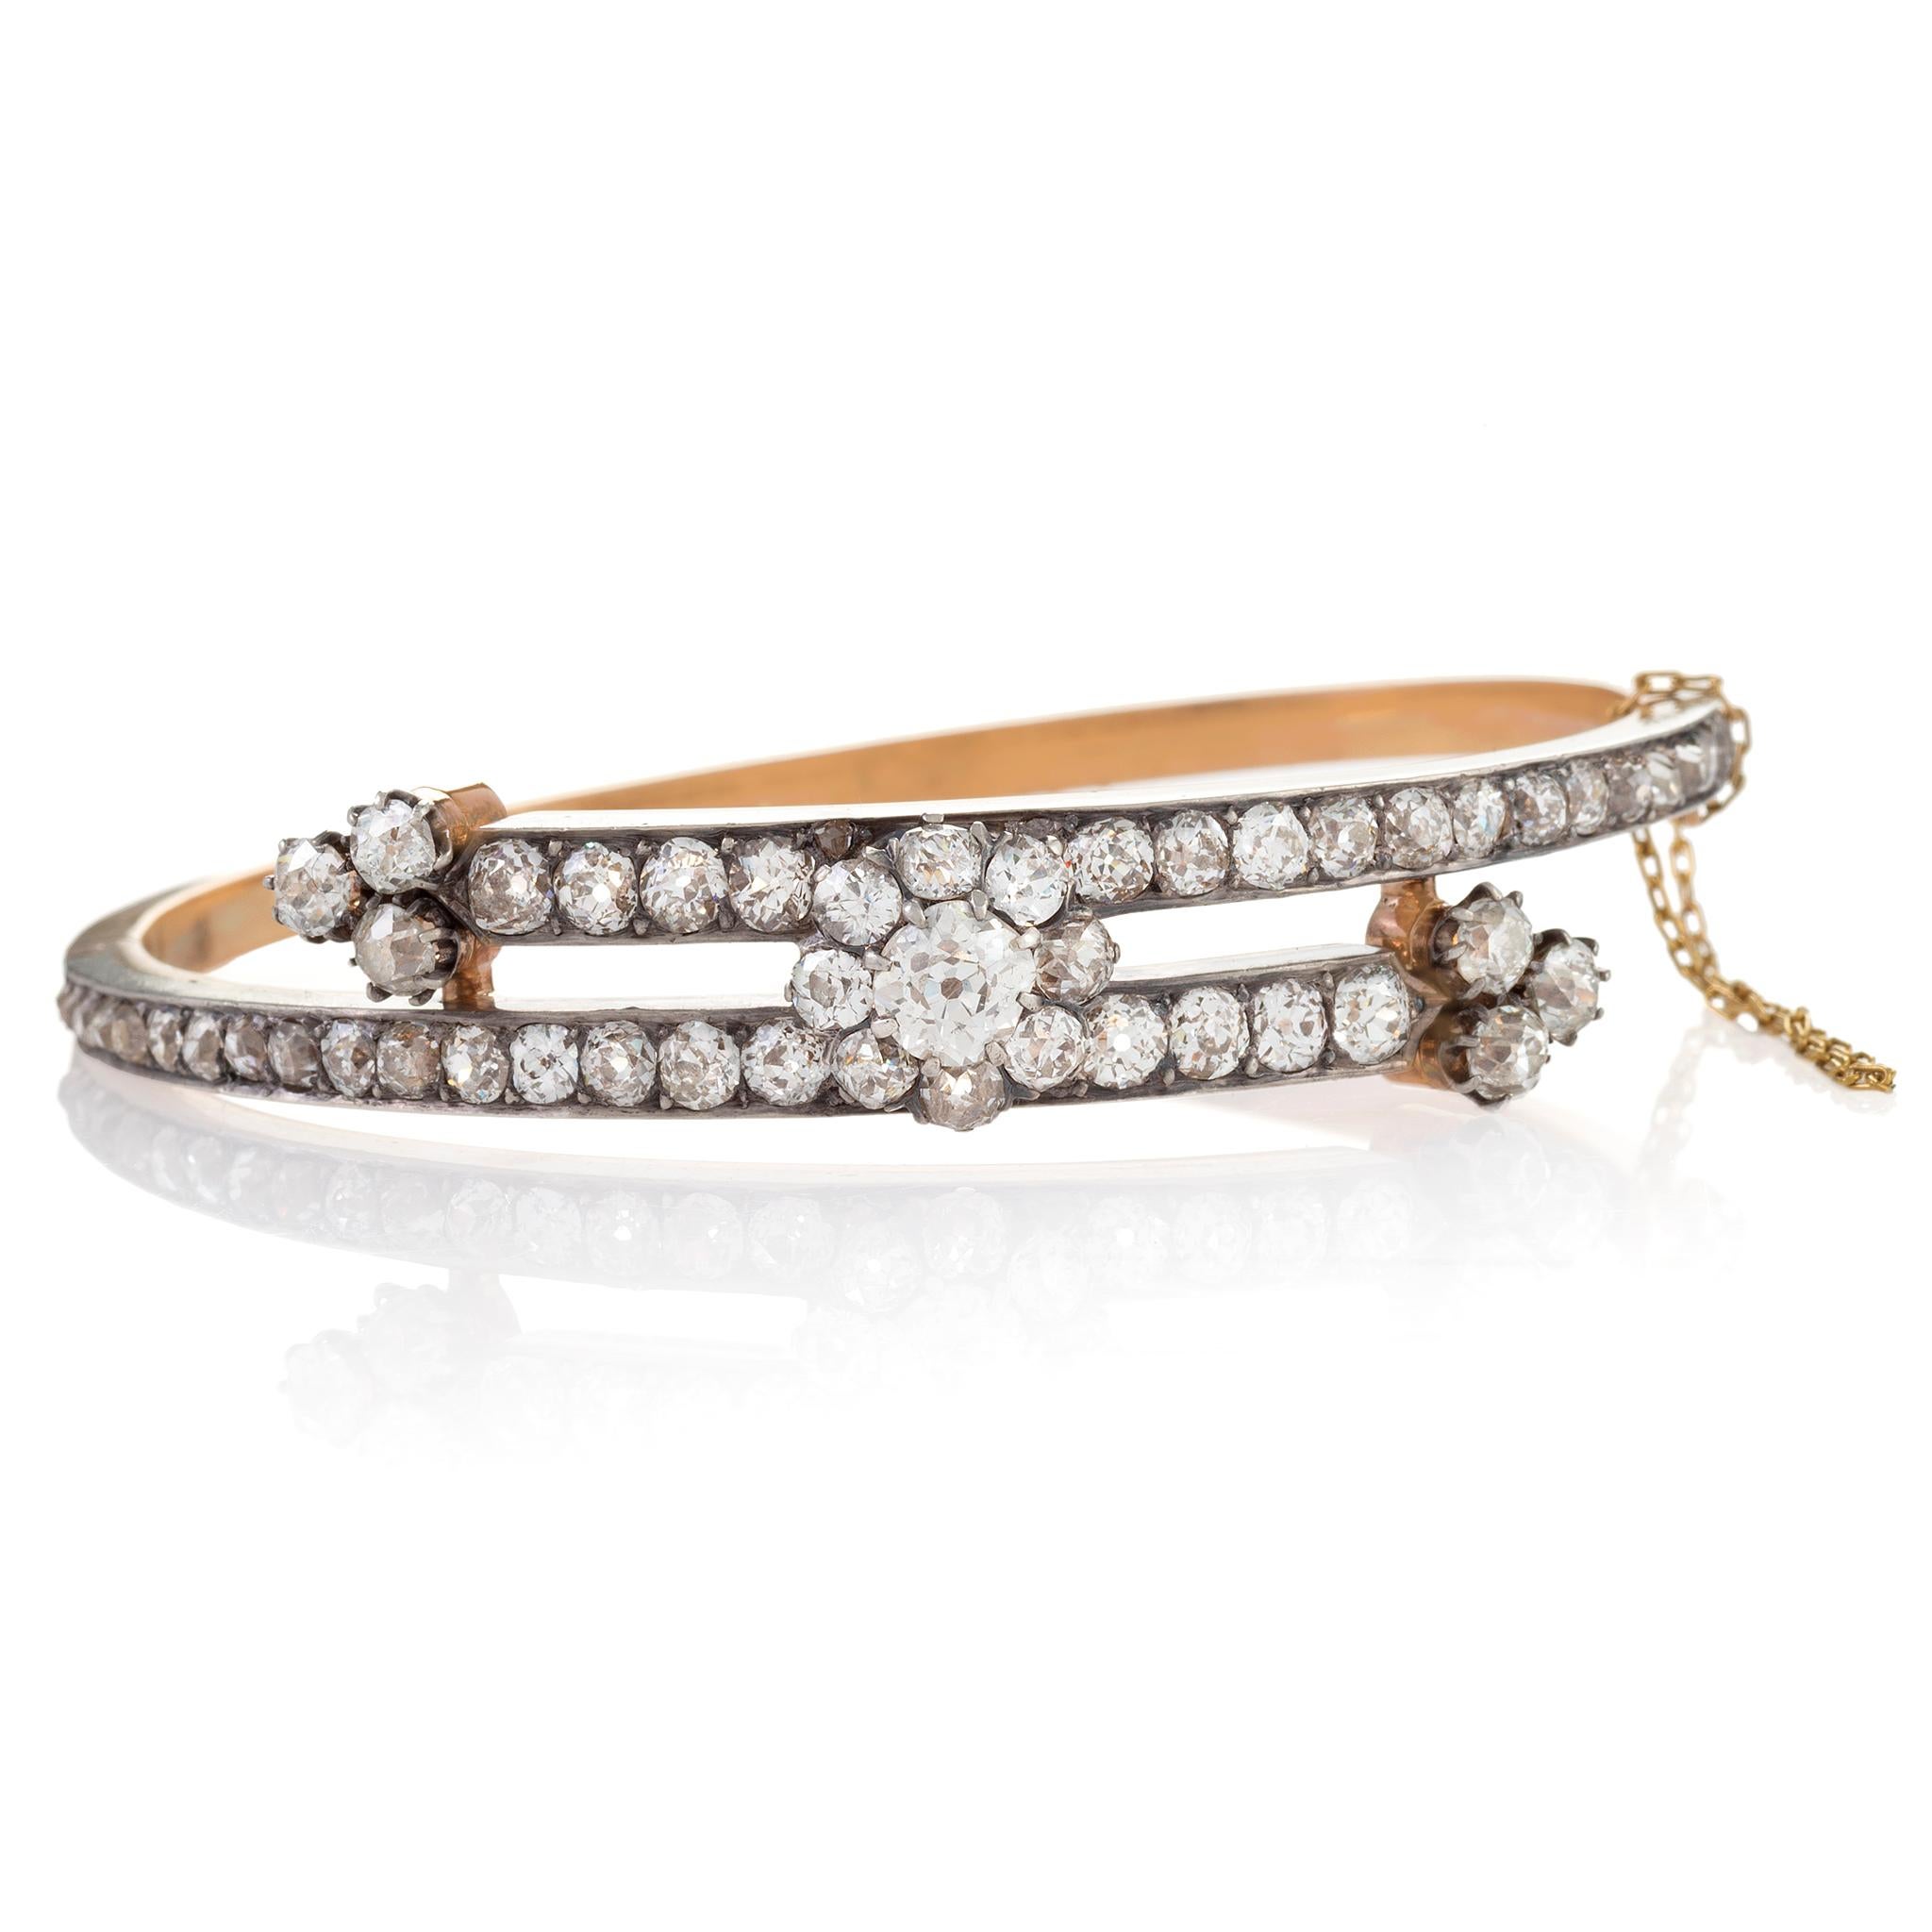 Dating from the late 19th century, this sparkling bypass bangle bracelet is set with nearly sixty old mine-cut diamonds weighing, in total, close to six carats. Designed as a platinum-topped gold bypass form, with the top section bead-set throughout